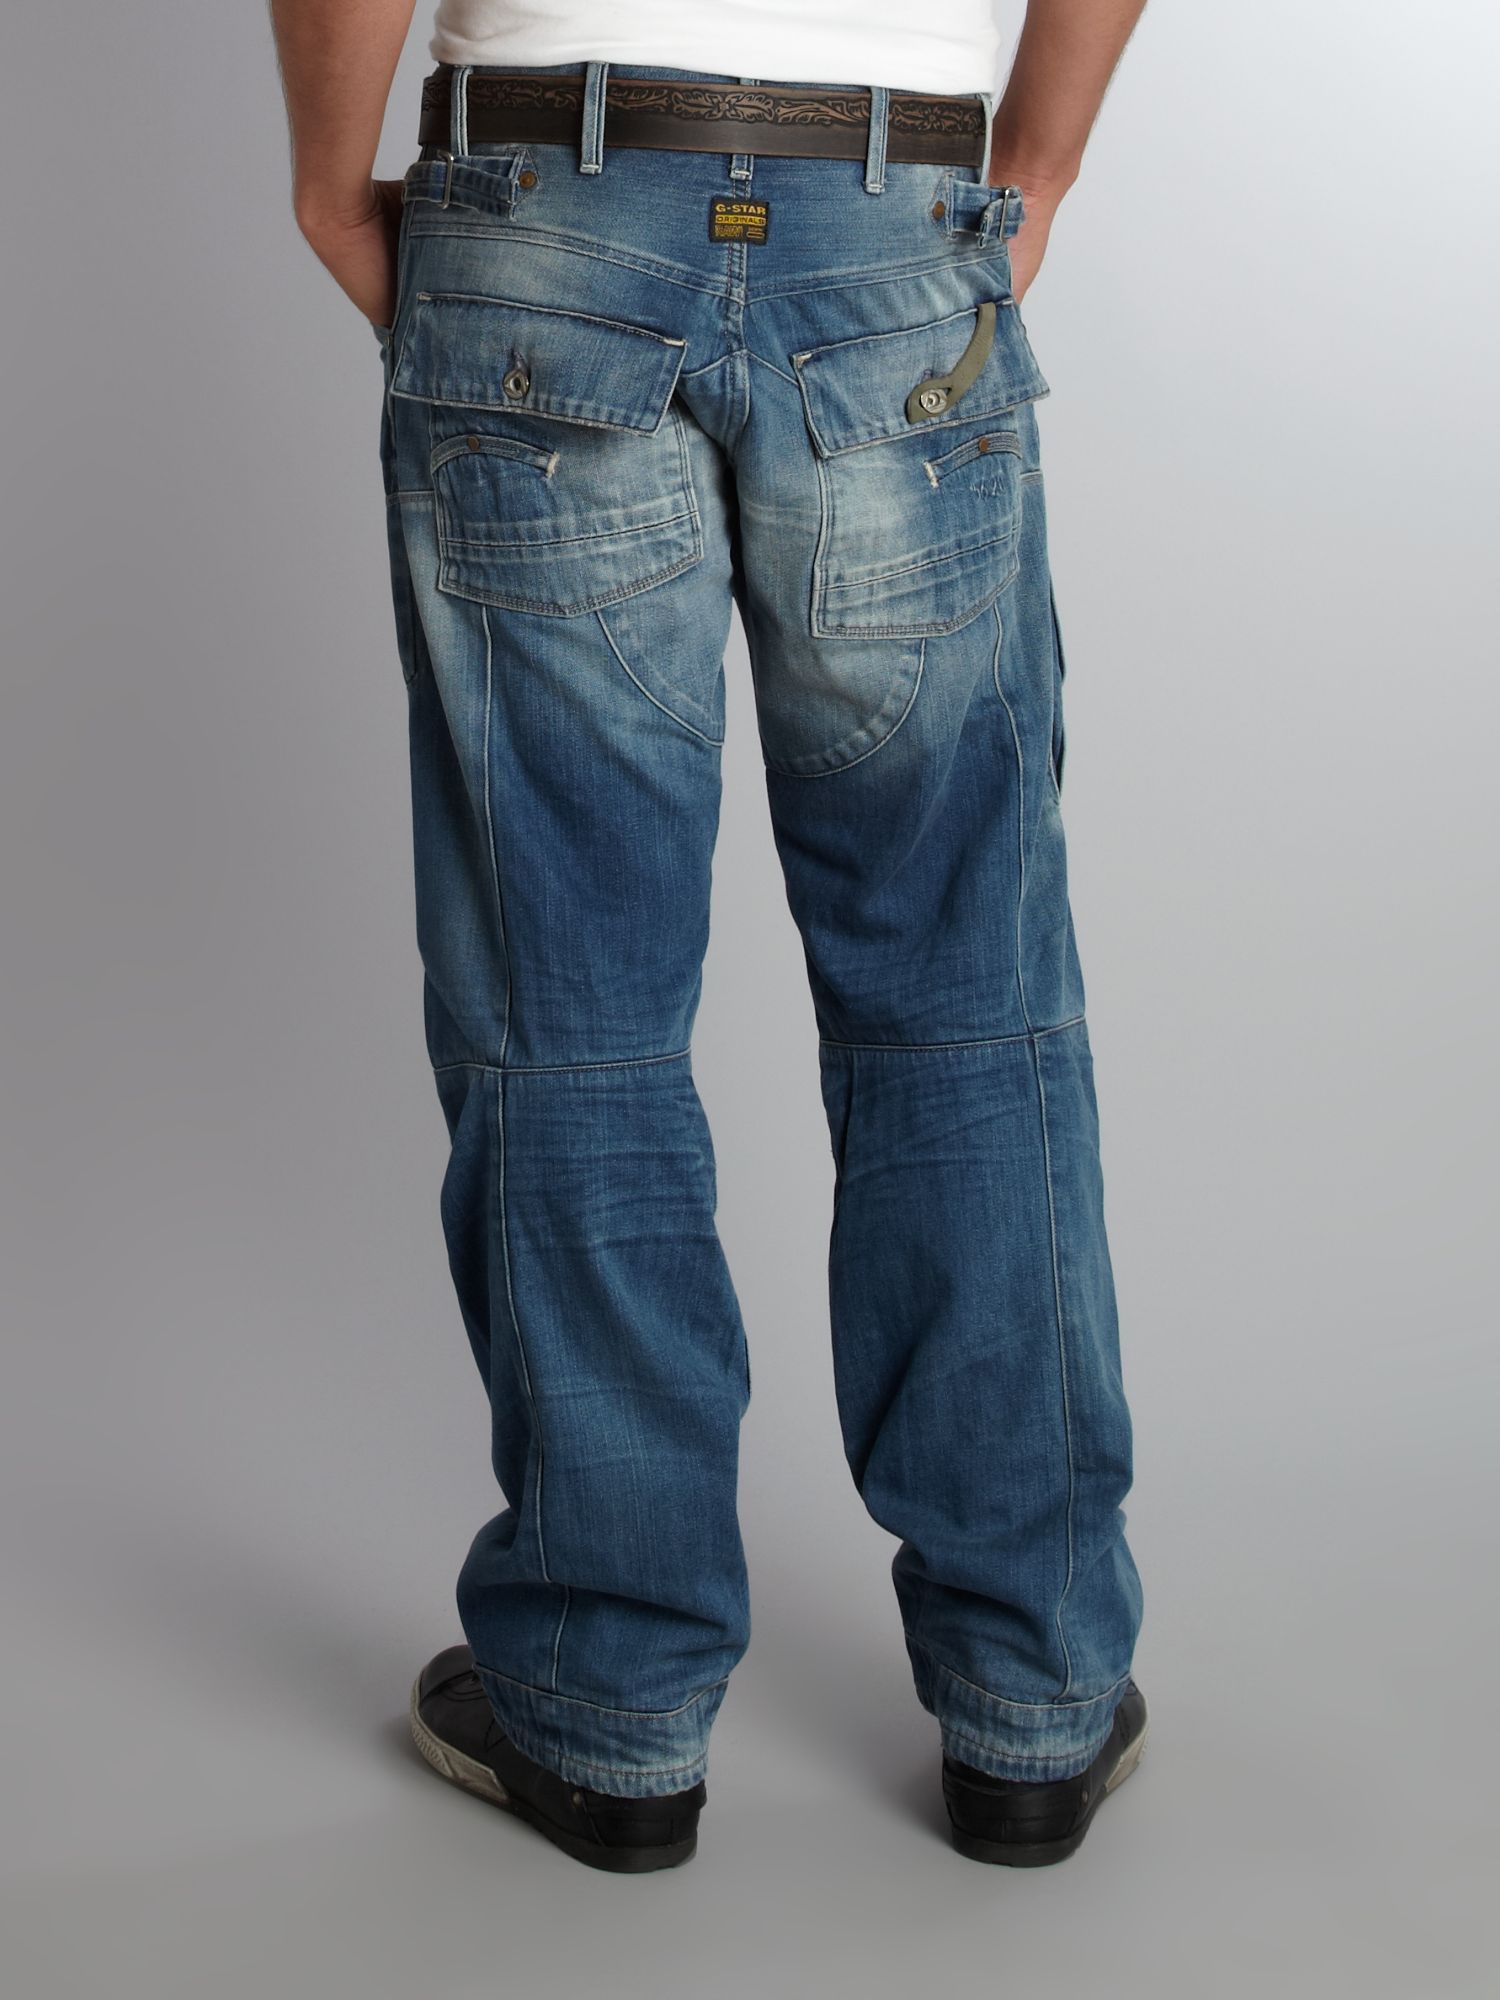 G Star Raw Elwood Loose Trail Jeans In Blue For Men Lyst 